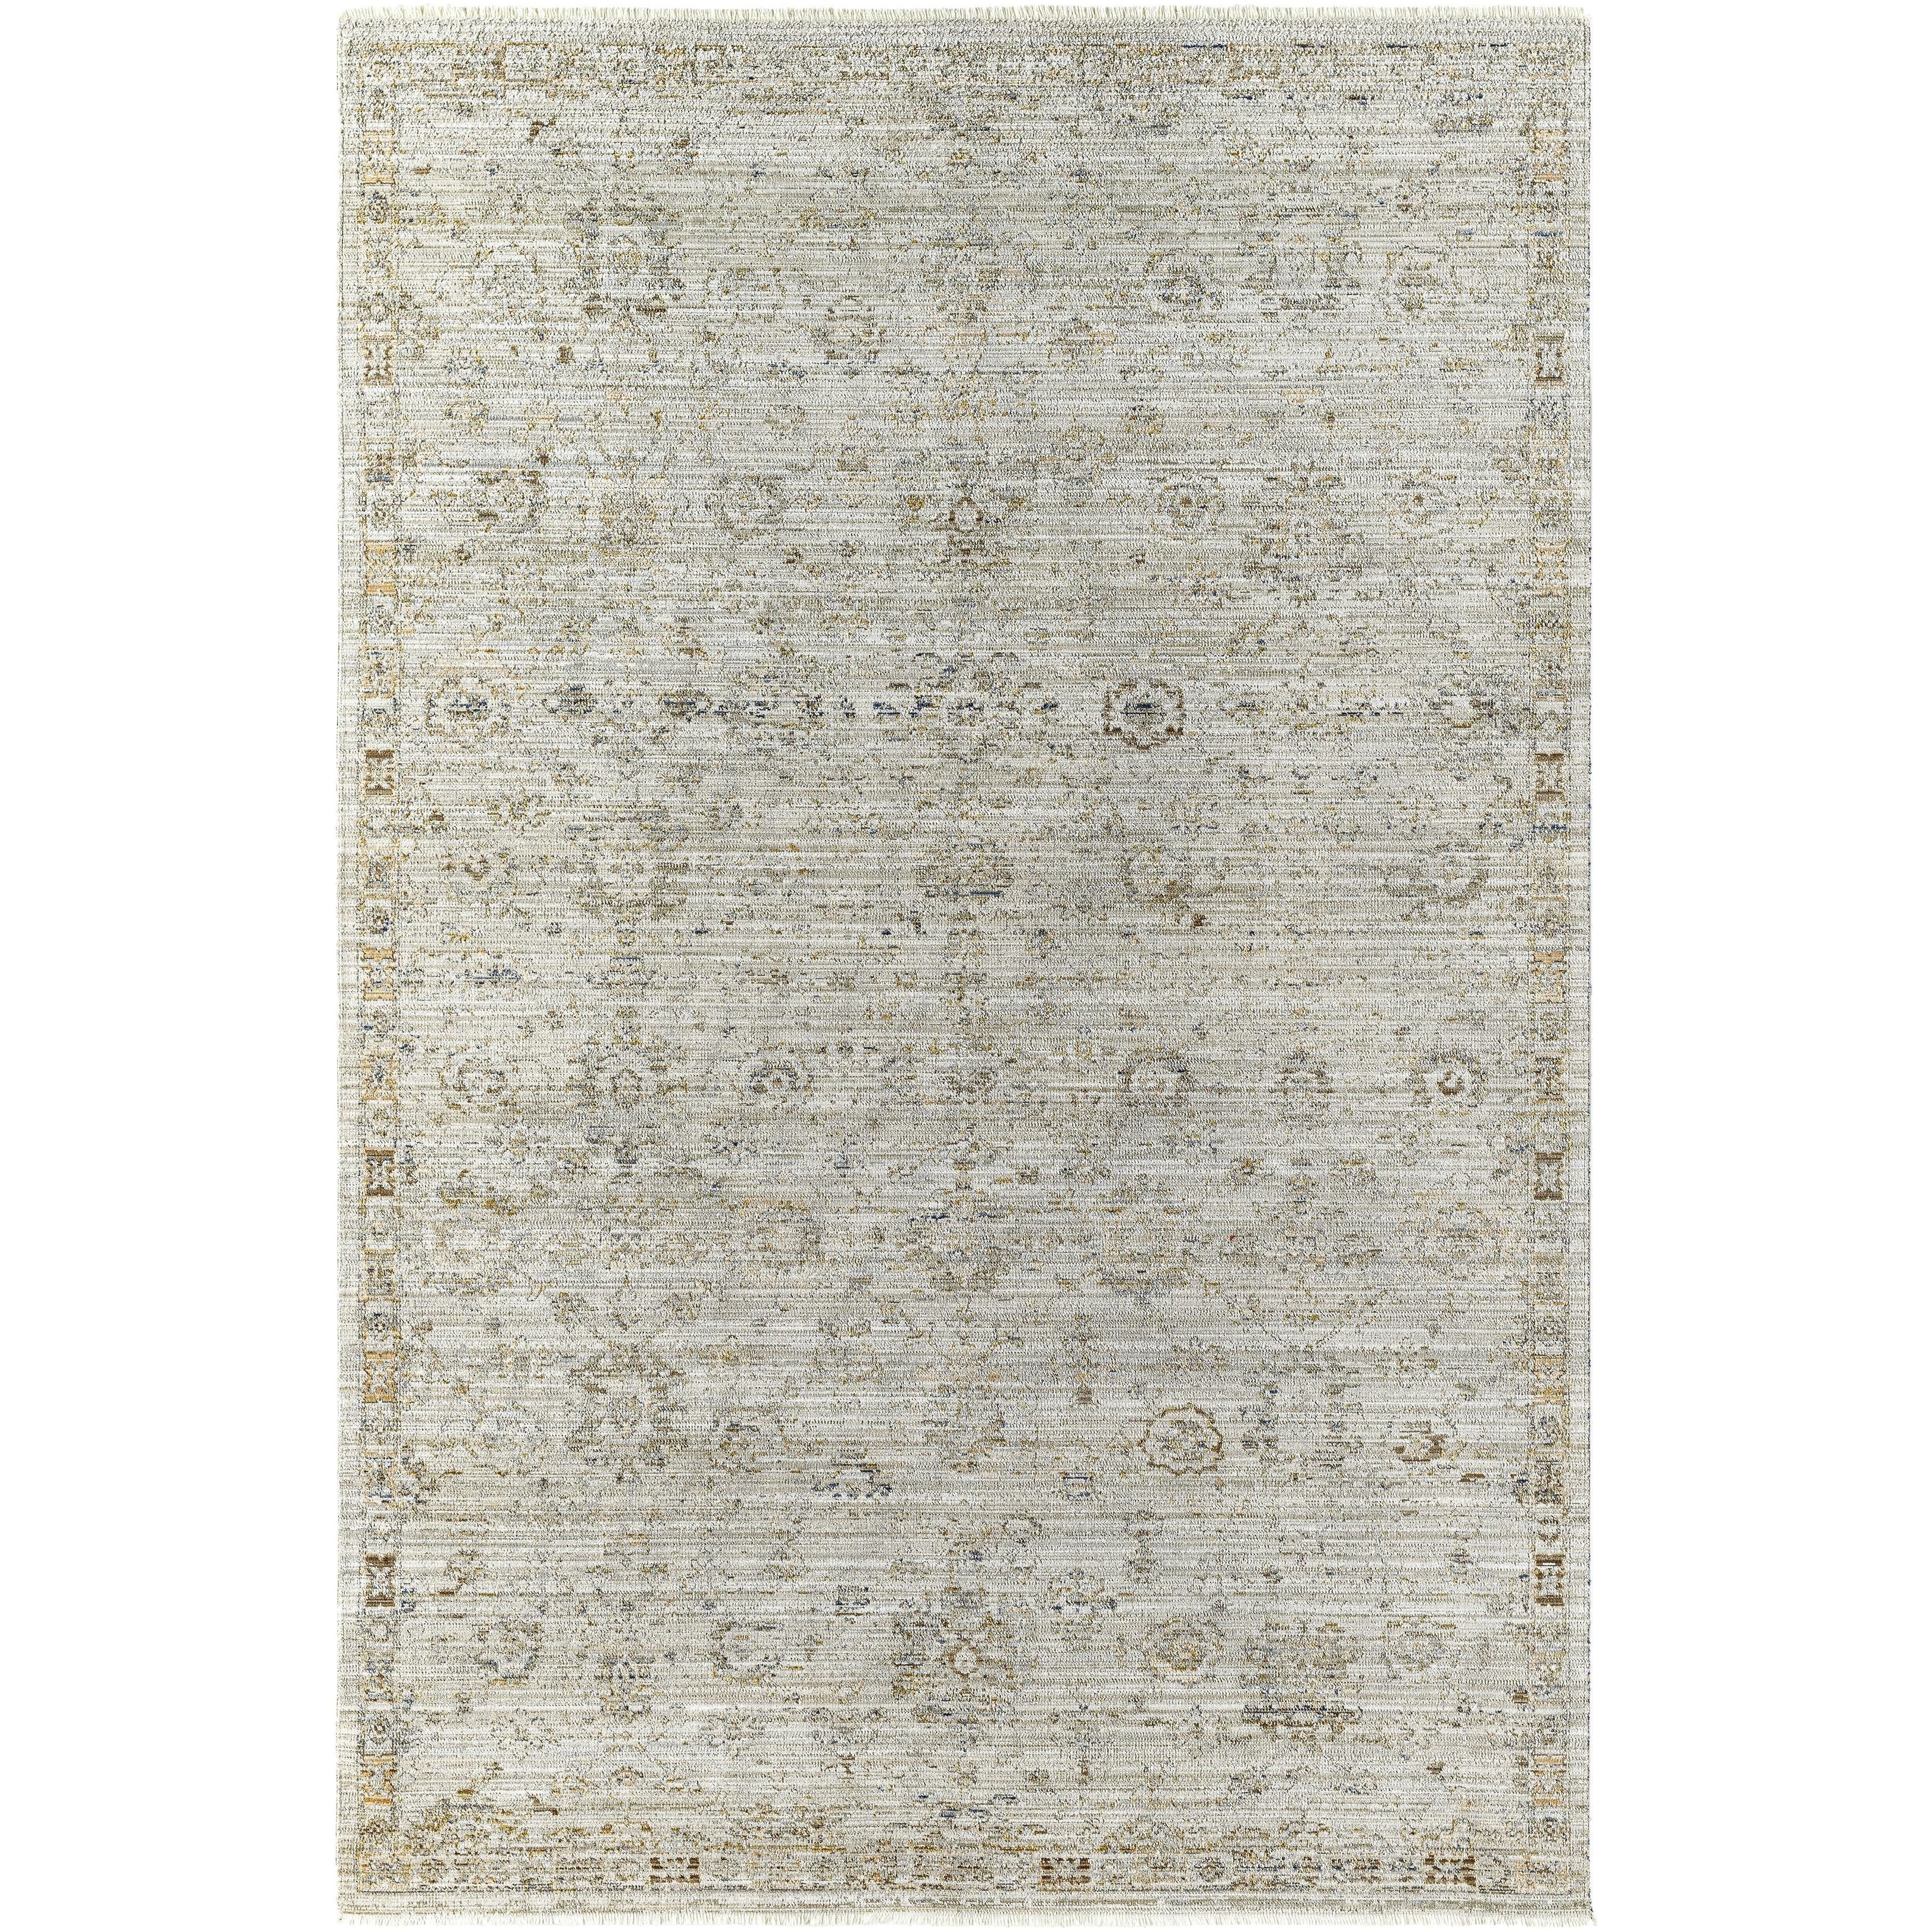 Introducing the Margaret area rug, the perfect piece to bring your space to life! This beautiful collaboration between Surya and Becki Owens features a vintage feel that is sure to be a statement piece in any room. Amethyst Home provides interior design, new home construction design consulting, vintage area rugs, and lighting in the Park City metro area.